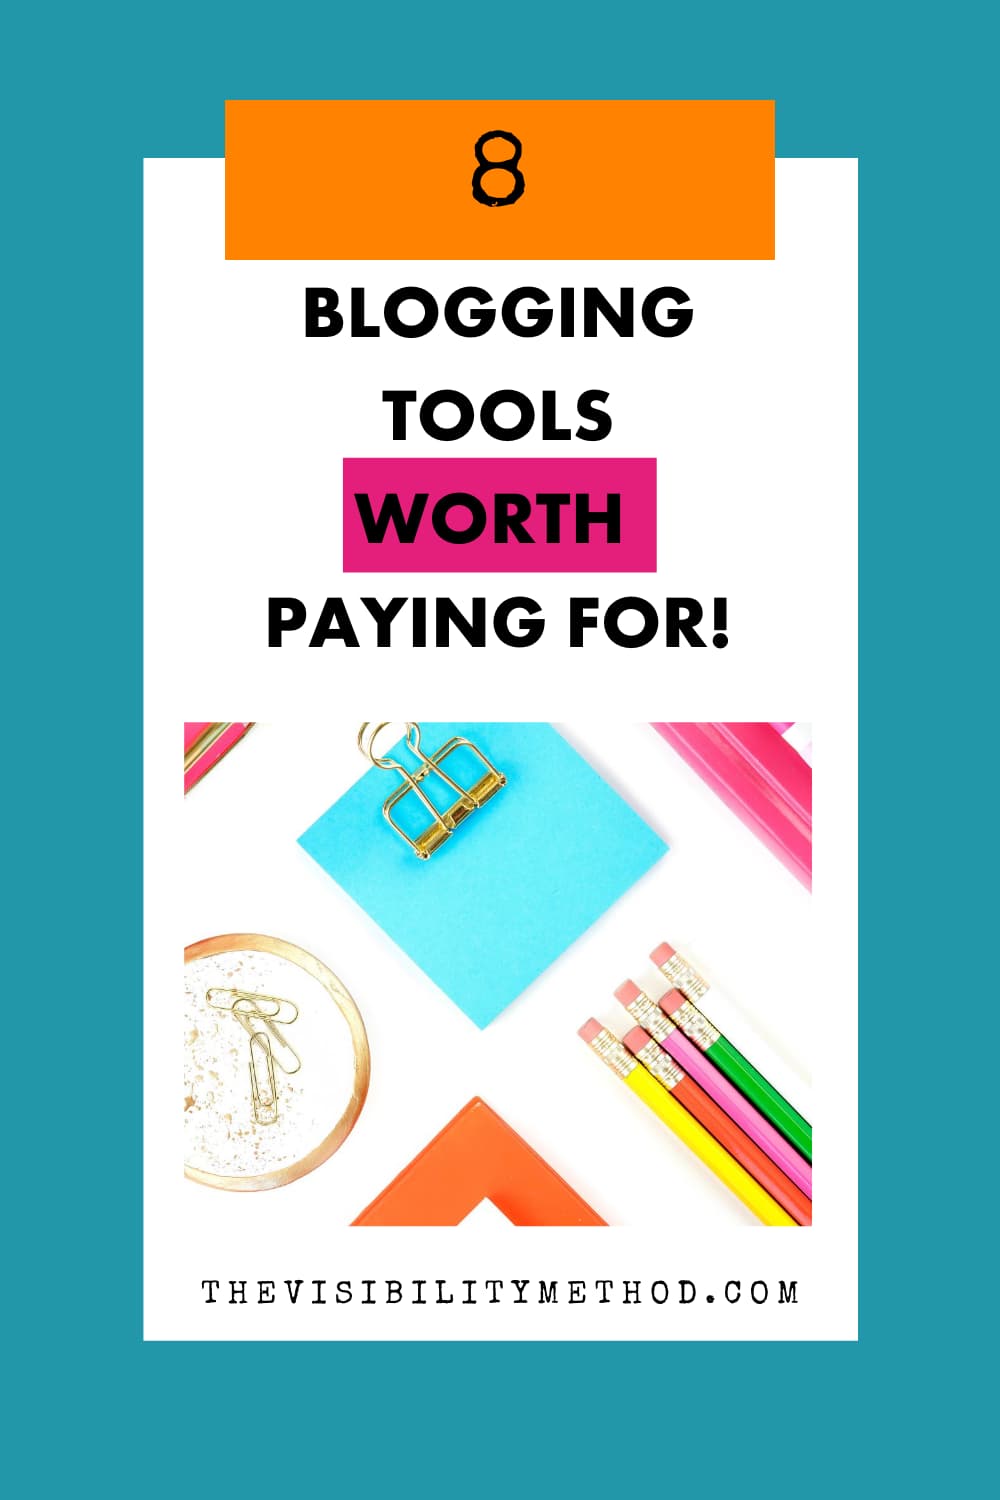 8 Blogging Tools Worth Paying For